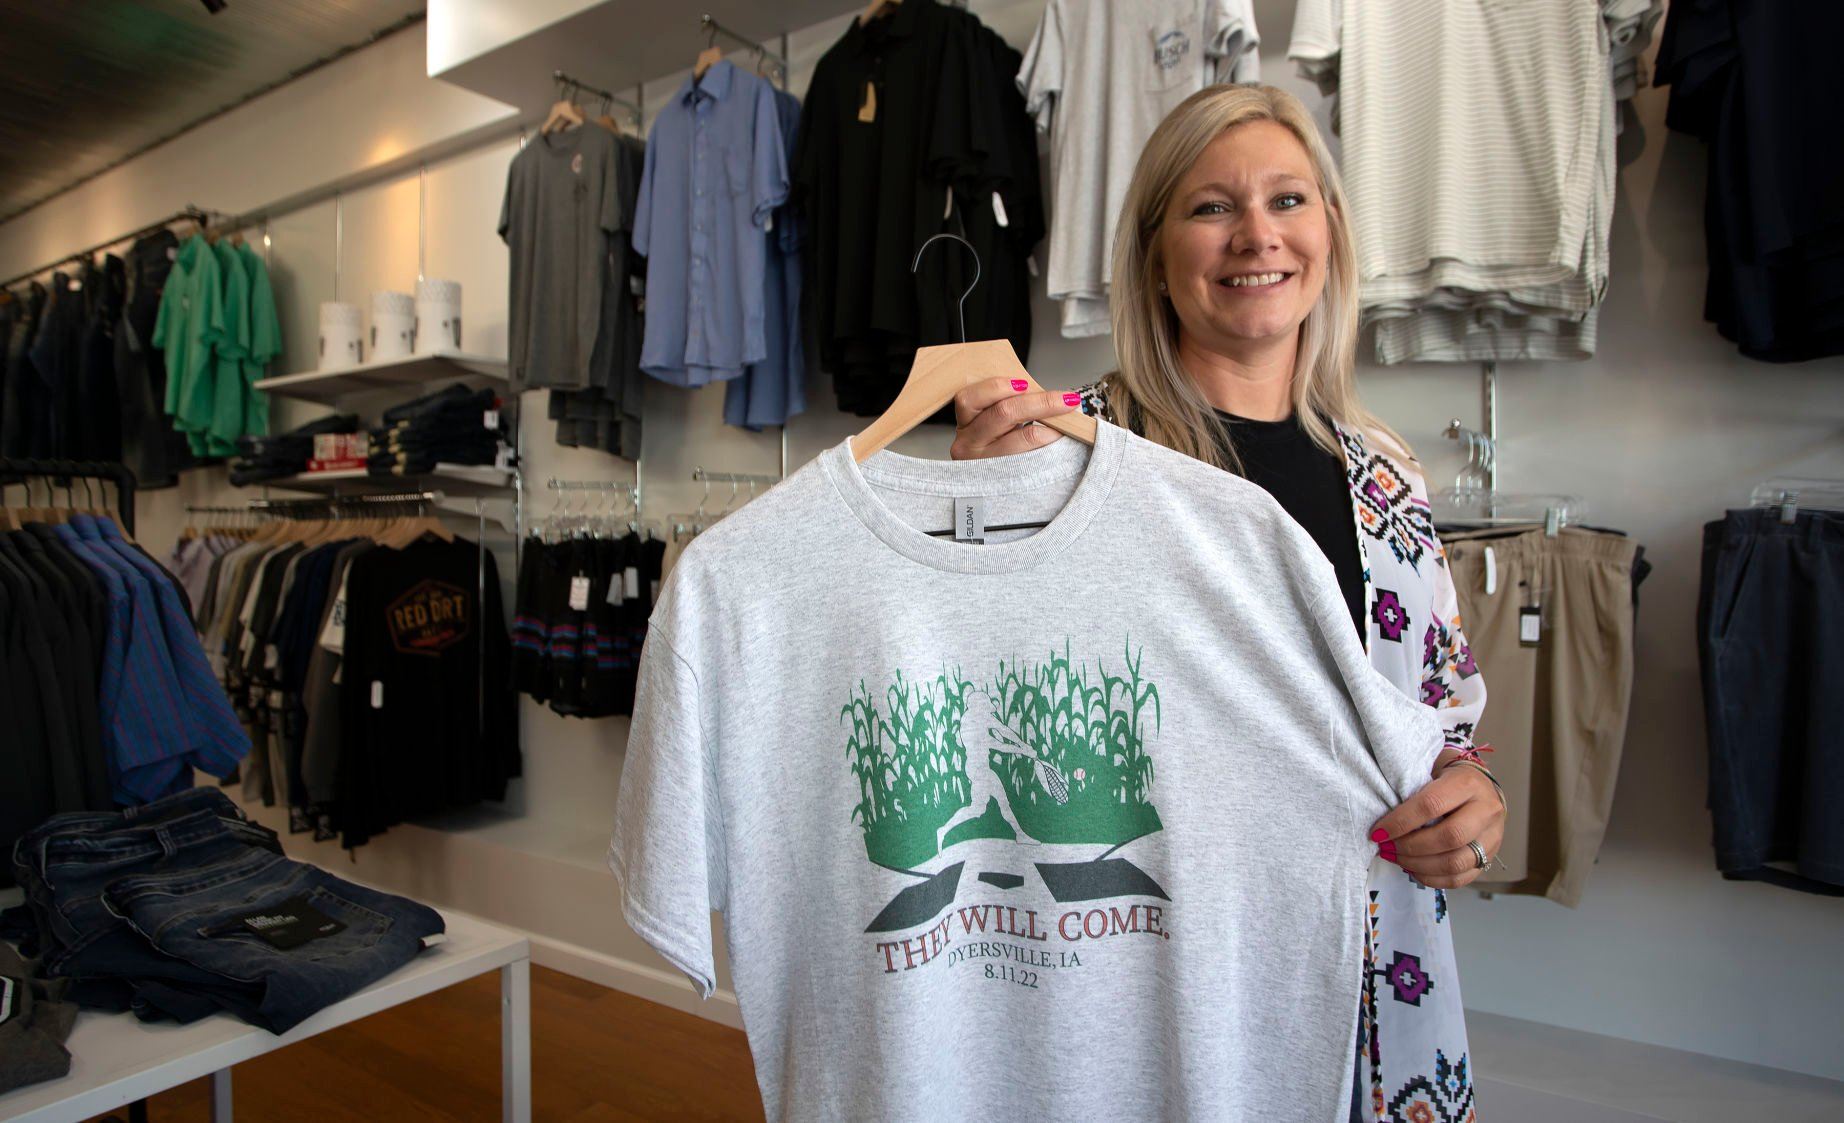 Jennifer Recker, owner of Haberdash Outfitters Co., shows off one of several Field of Dreams-themed shirts for sale at the business in Dyersville, Iowa, as the Chicago Cubs and Cincinnati Reds game approaches.    PHOTO CREDIT: Stephen Gassman